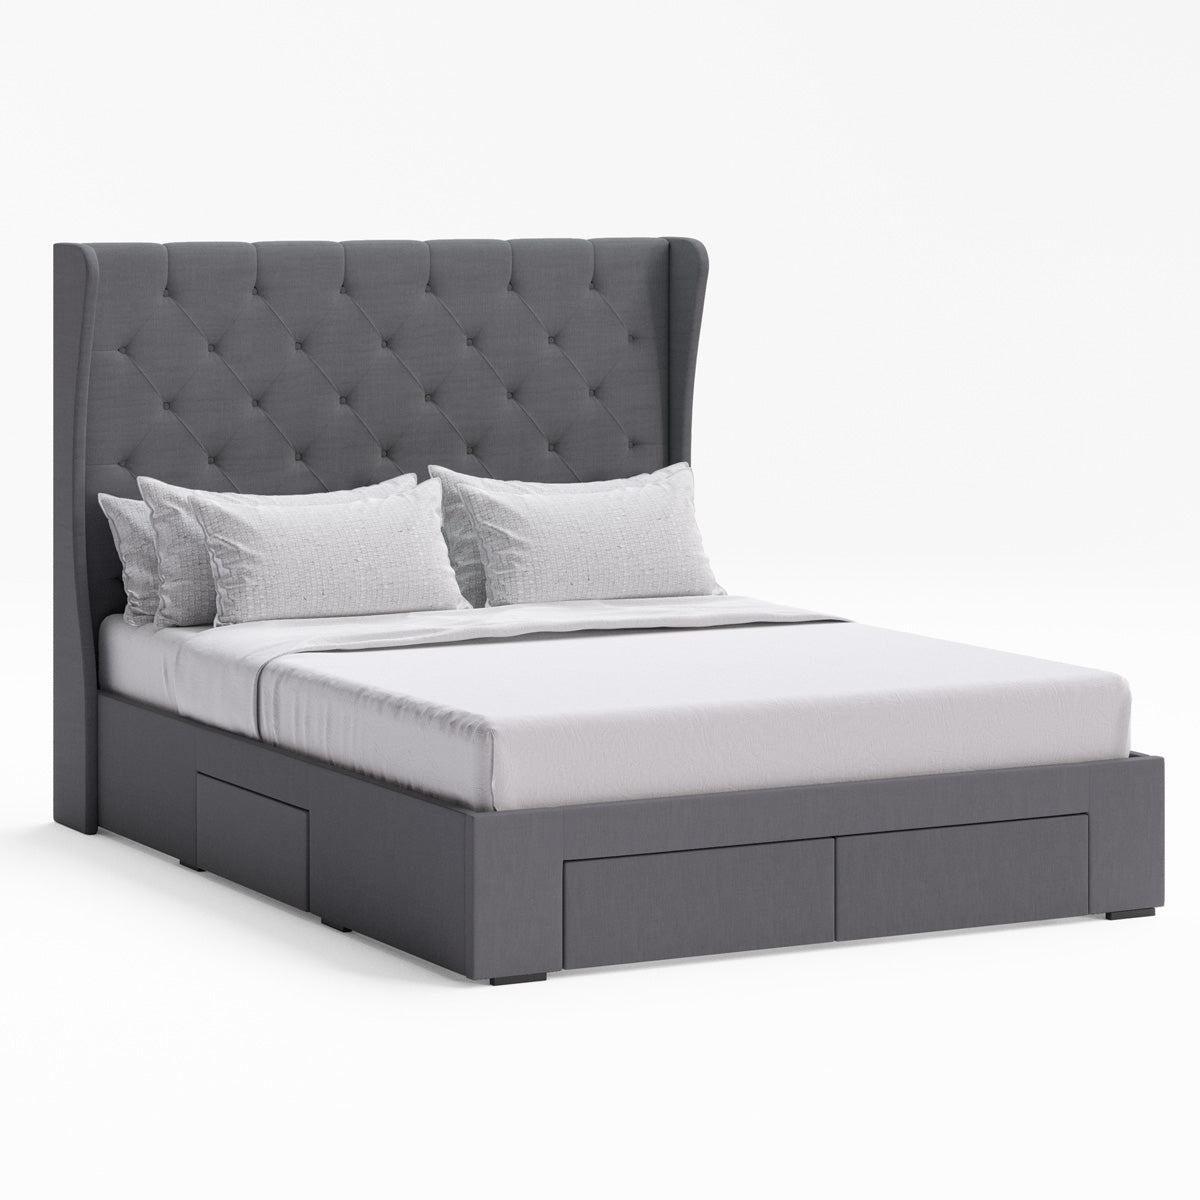 Windsor Winged Bed Frame with Four Storage Drawers (Charcoal Fabric)